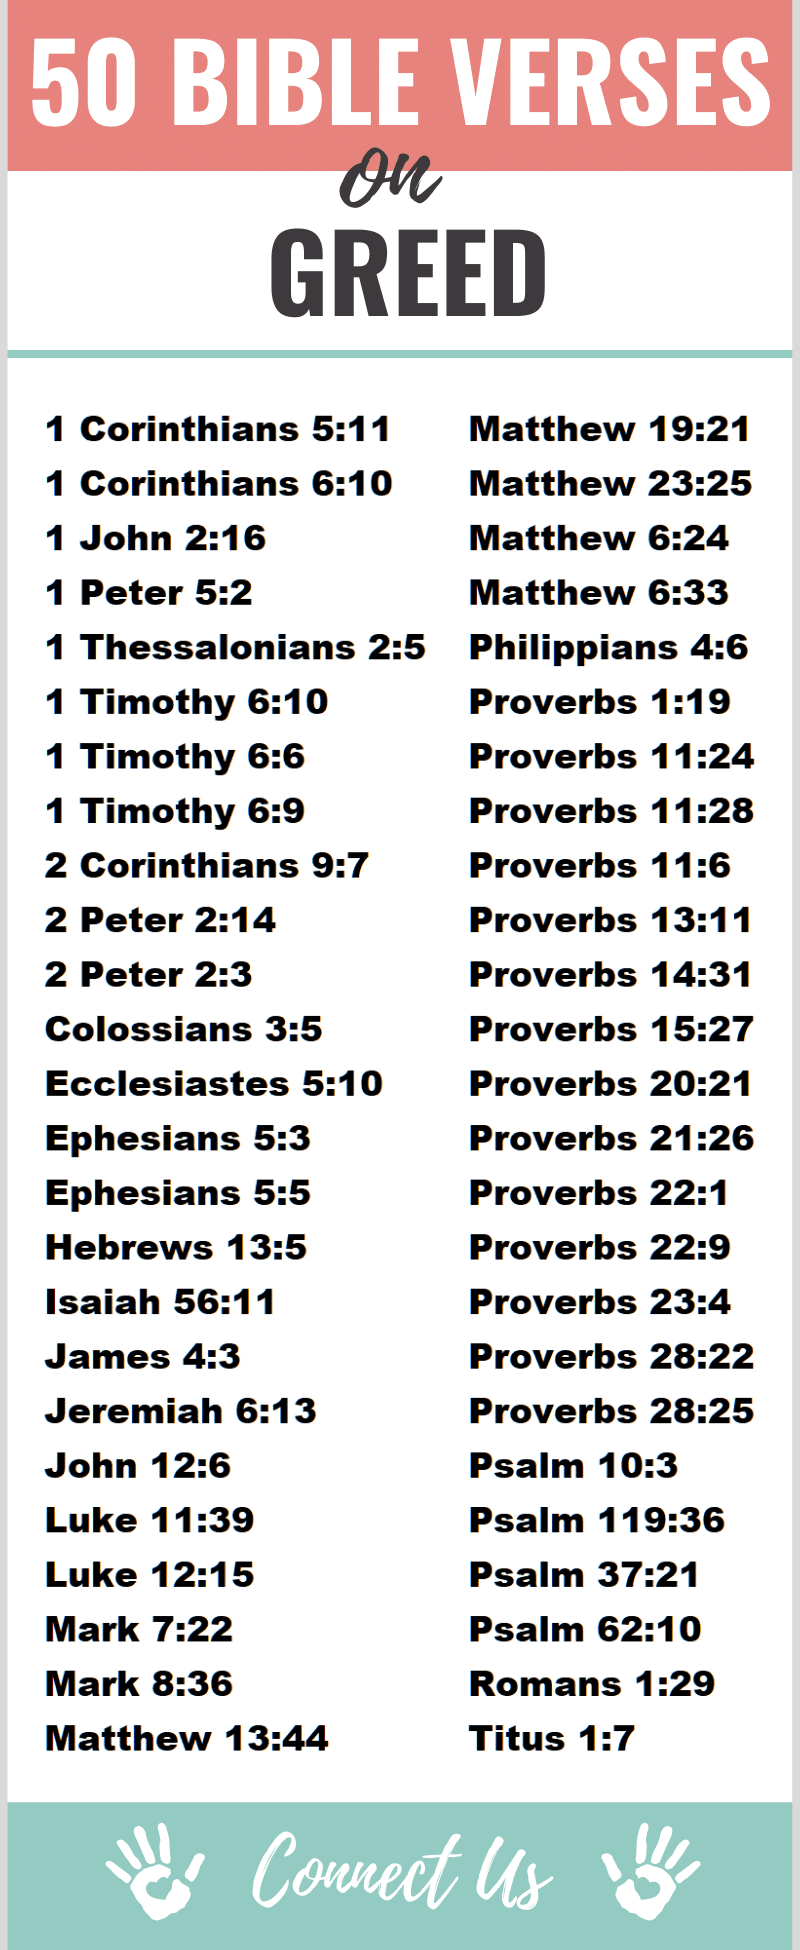 Bible Verses on Greed